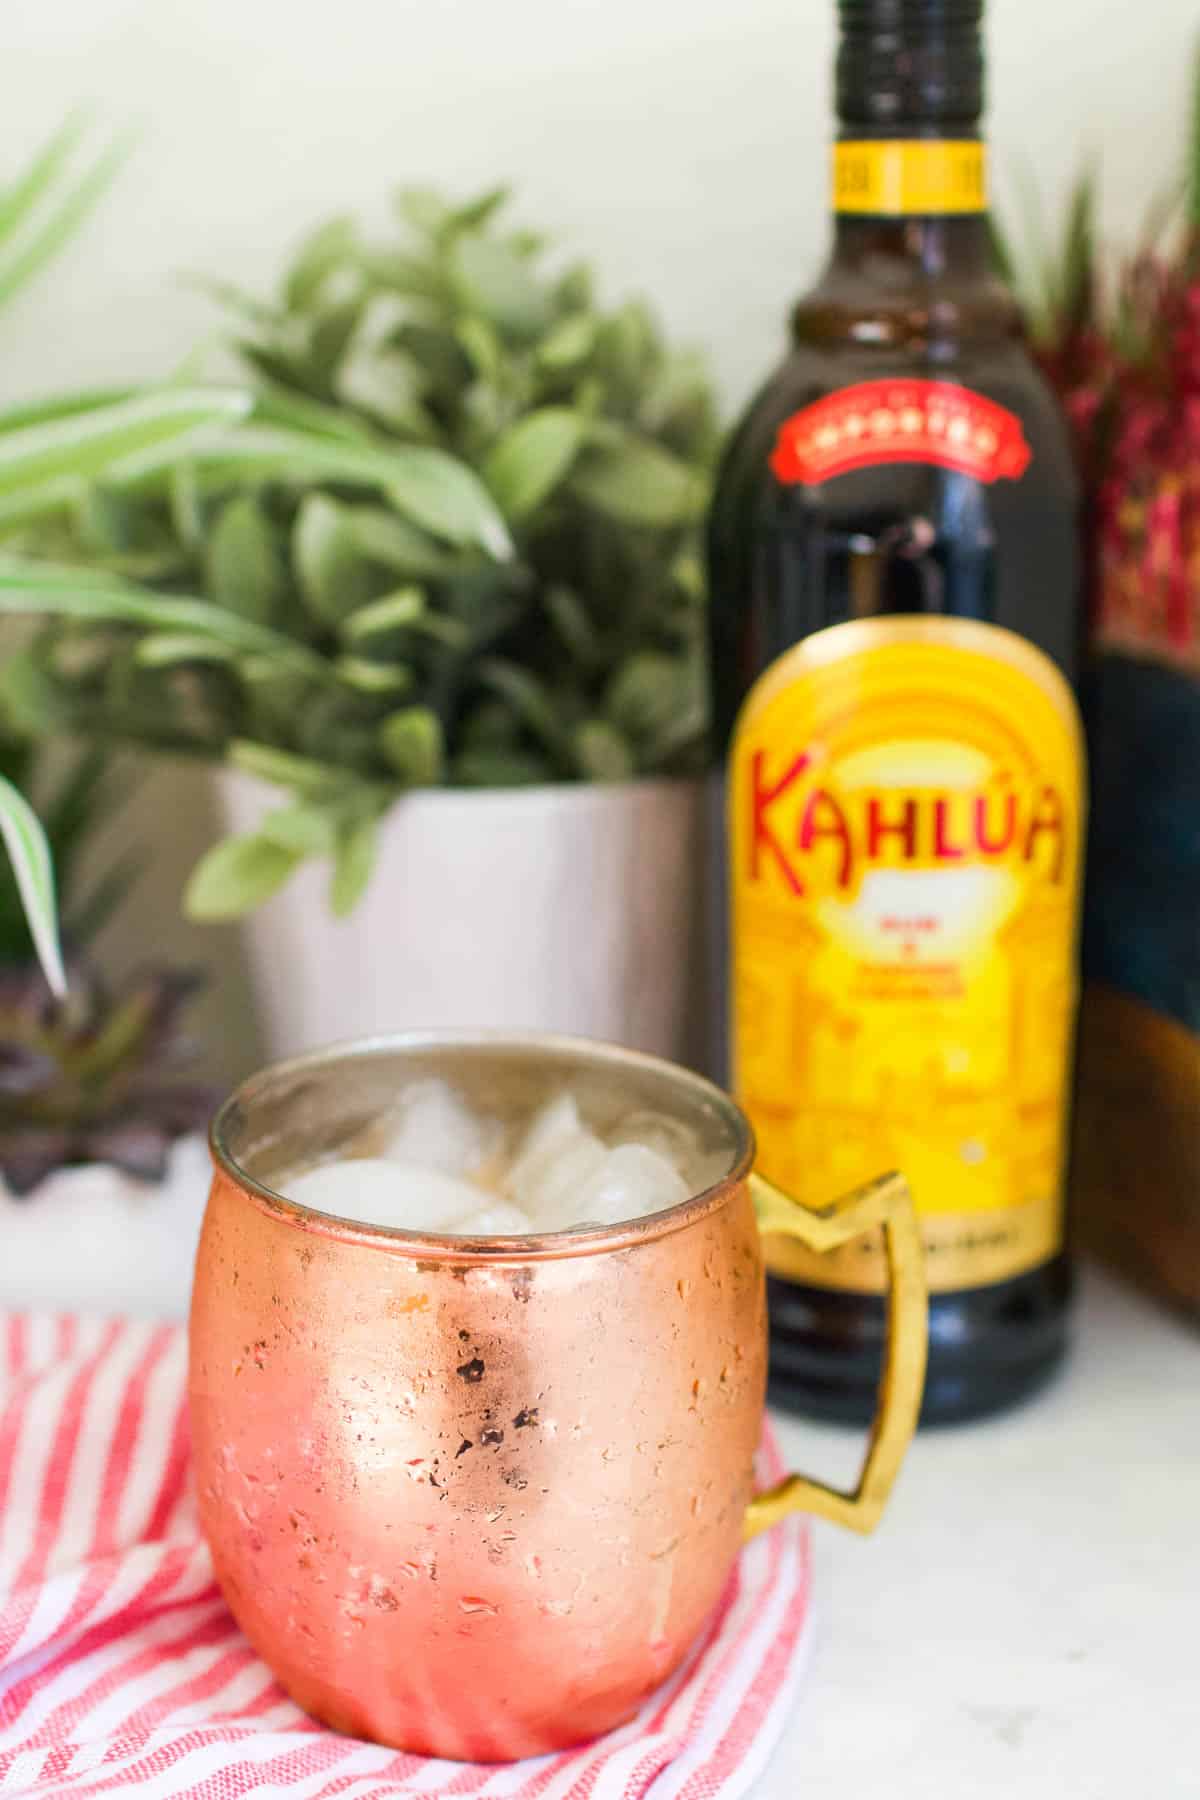 Kahlua Mule in a copper mug on a table next to a bottle of coffee flavored liqueur.